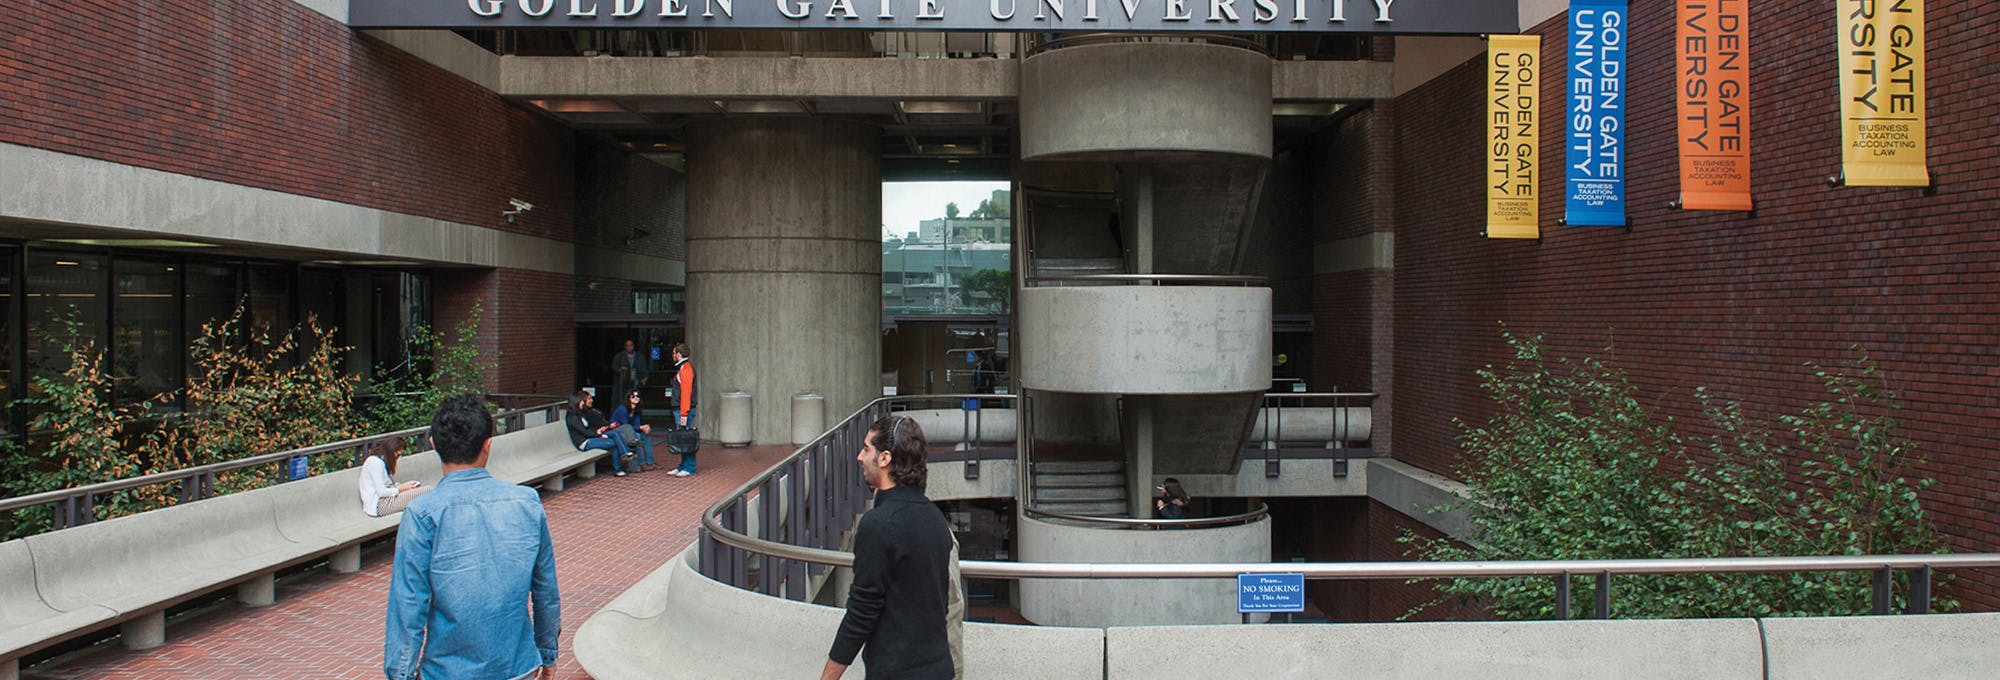 Outdoor view of Golden Gate University building with students walking